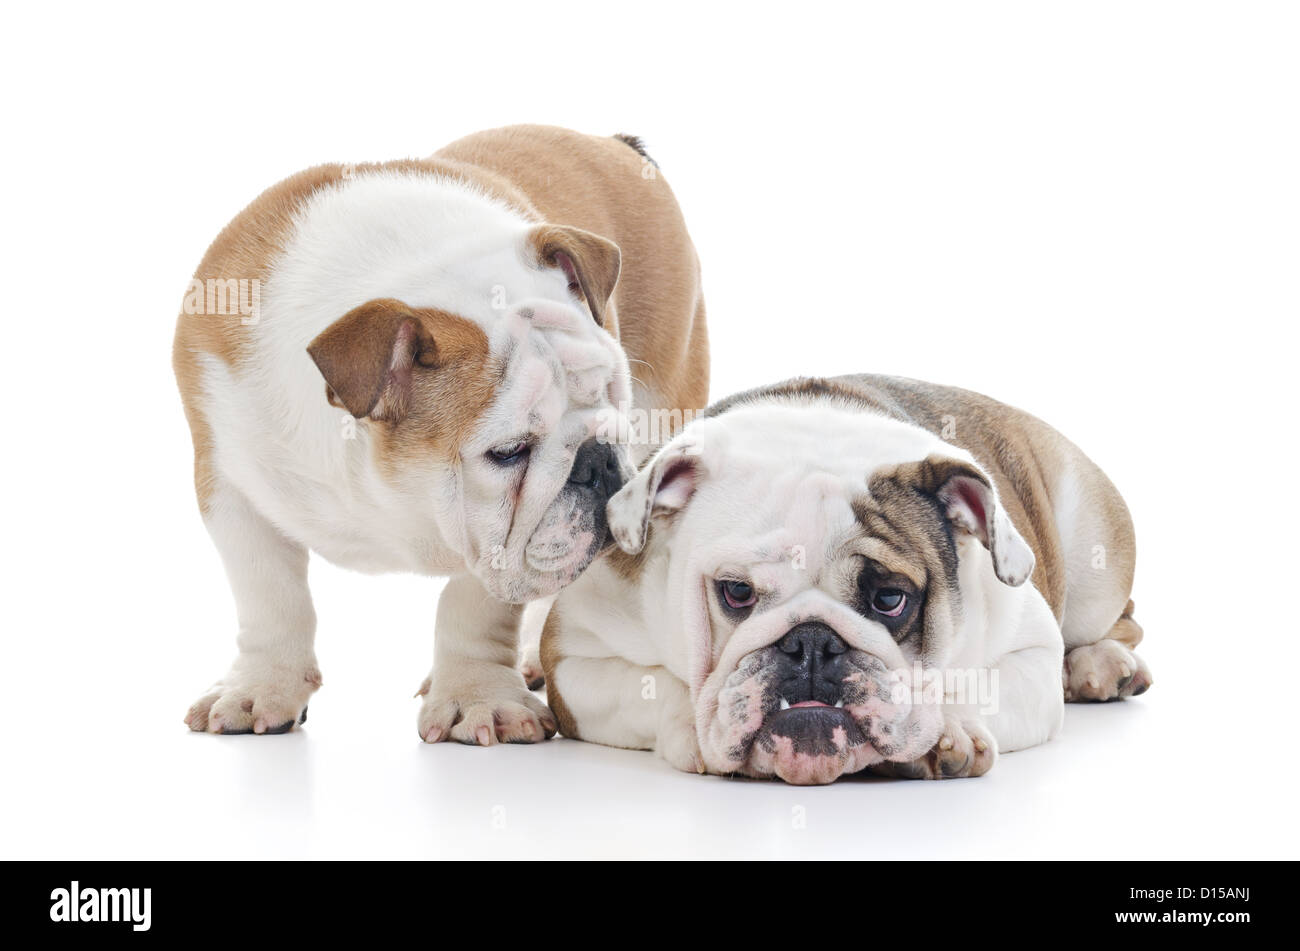 two English bulldog dogs over white background, it looks like one is whispering to the other Stock Photo